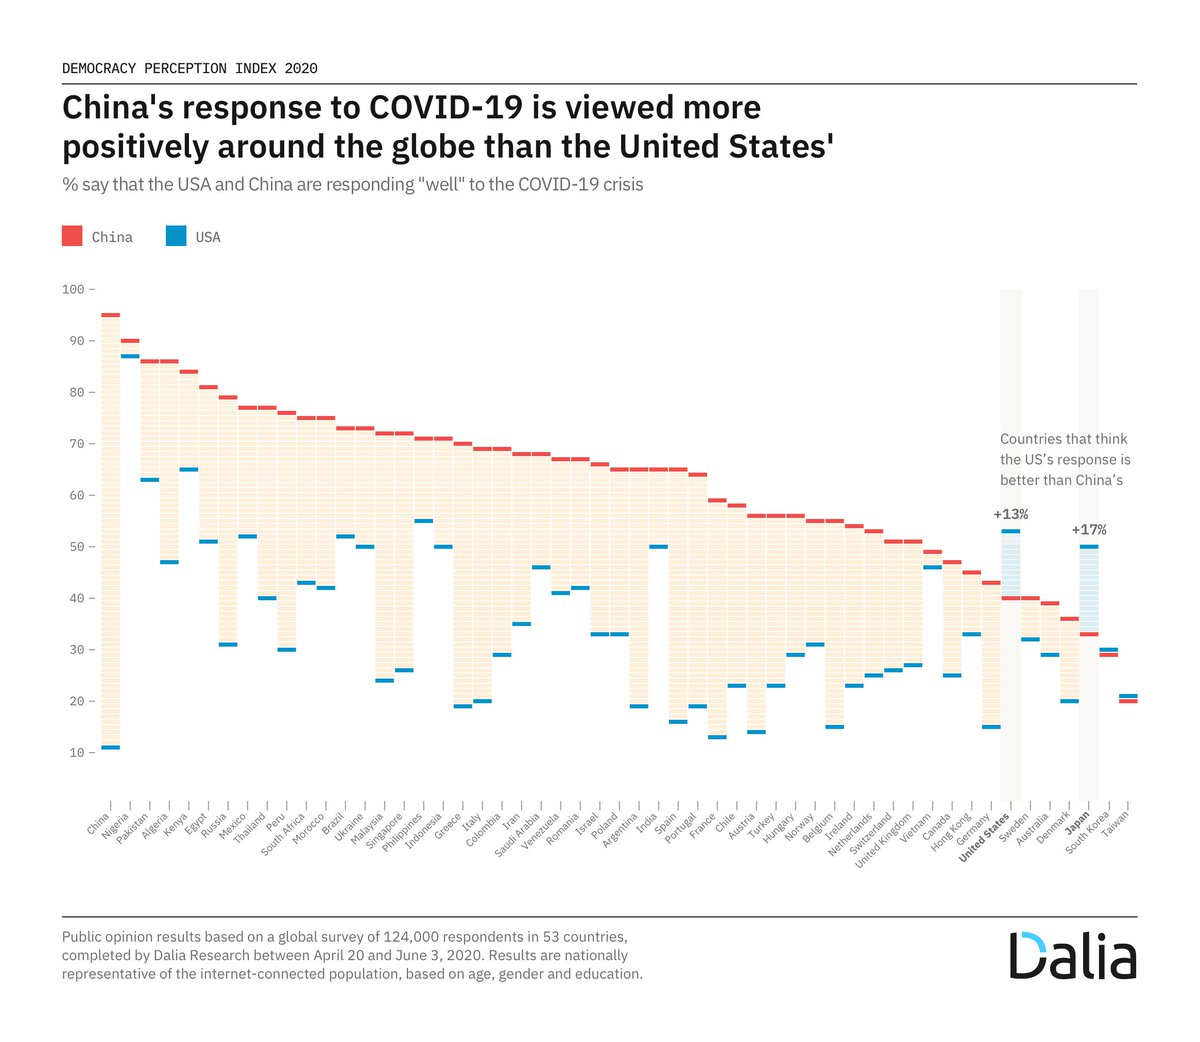 Most countries think that China has done better than the US in responding to COVID. The column for China is self-explanatory. What's worth noting is those who are the most critical of China's responses are East Asian democracies, HK, Sweden, Denmark and prominent Western powers.